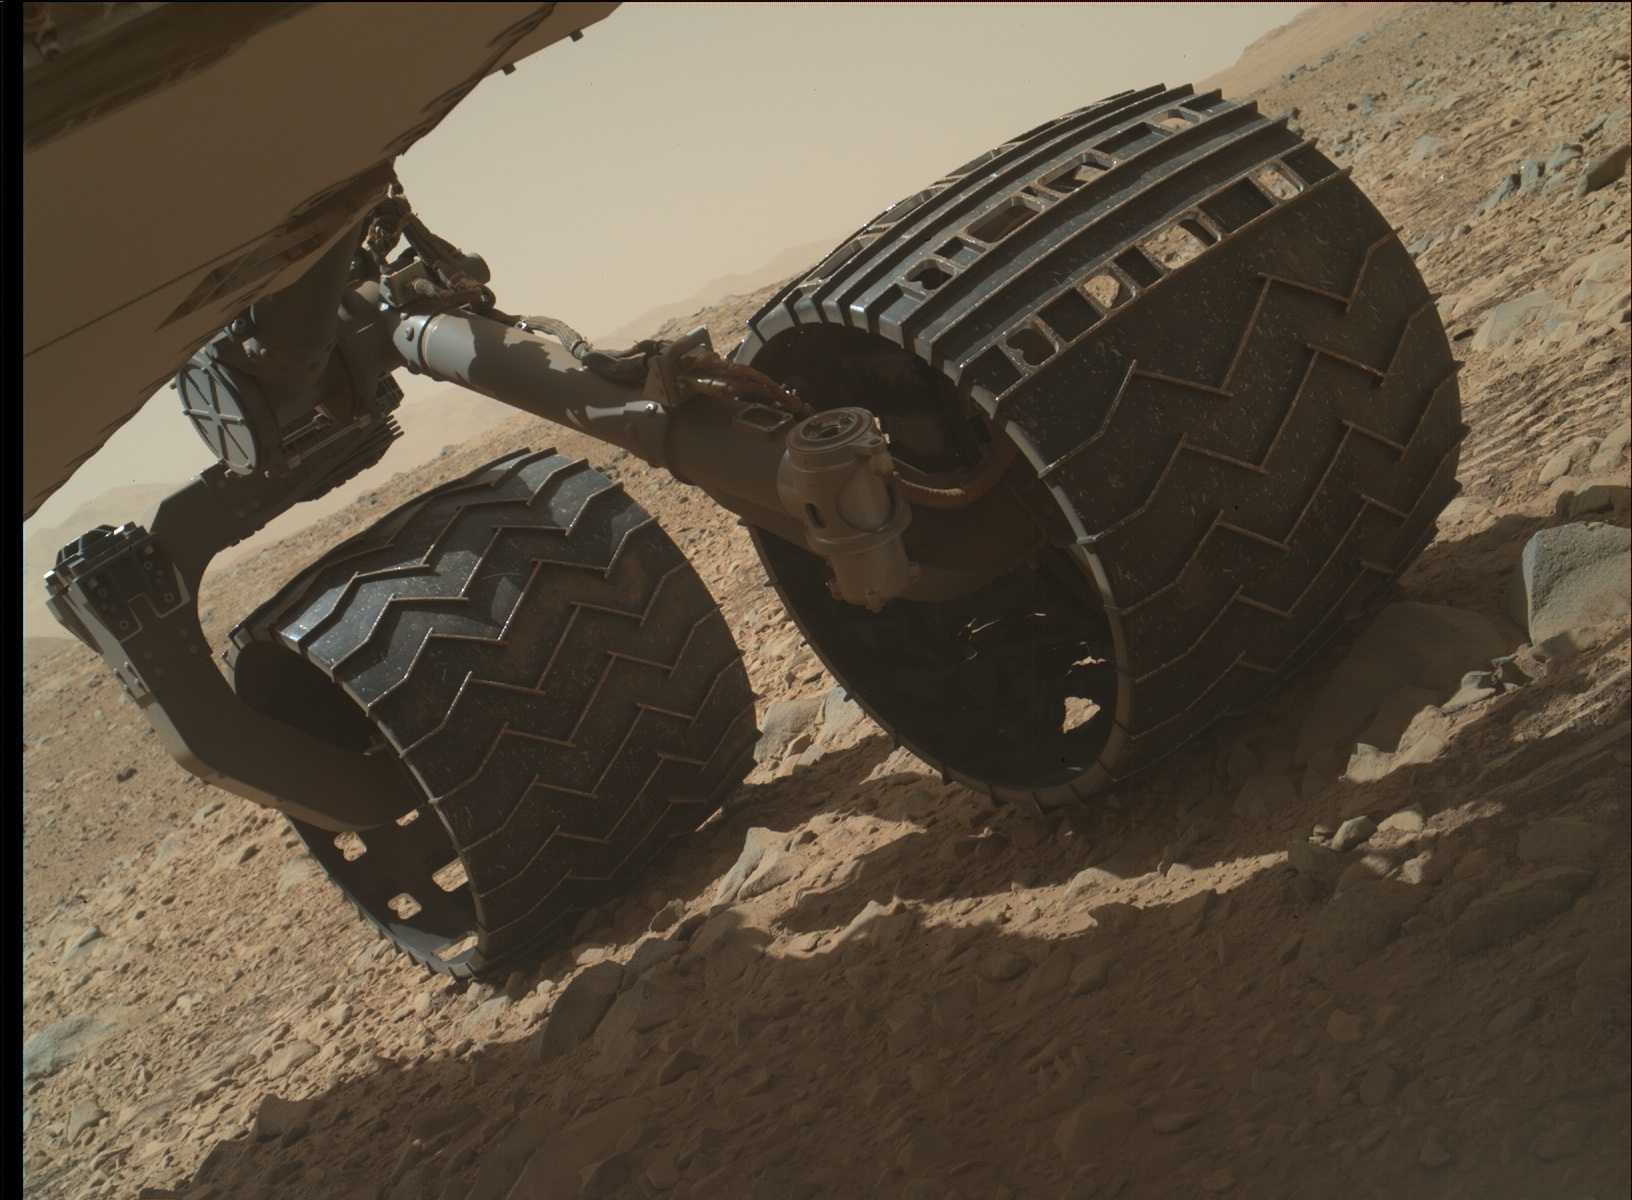 Nasa's Mars rover Curiosity acquired this image using its Mars Hand Lens Imager (MAHLI) on Sol 519